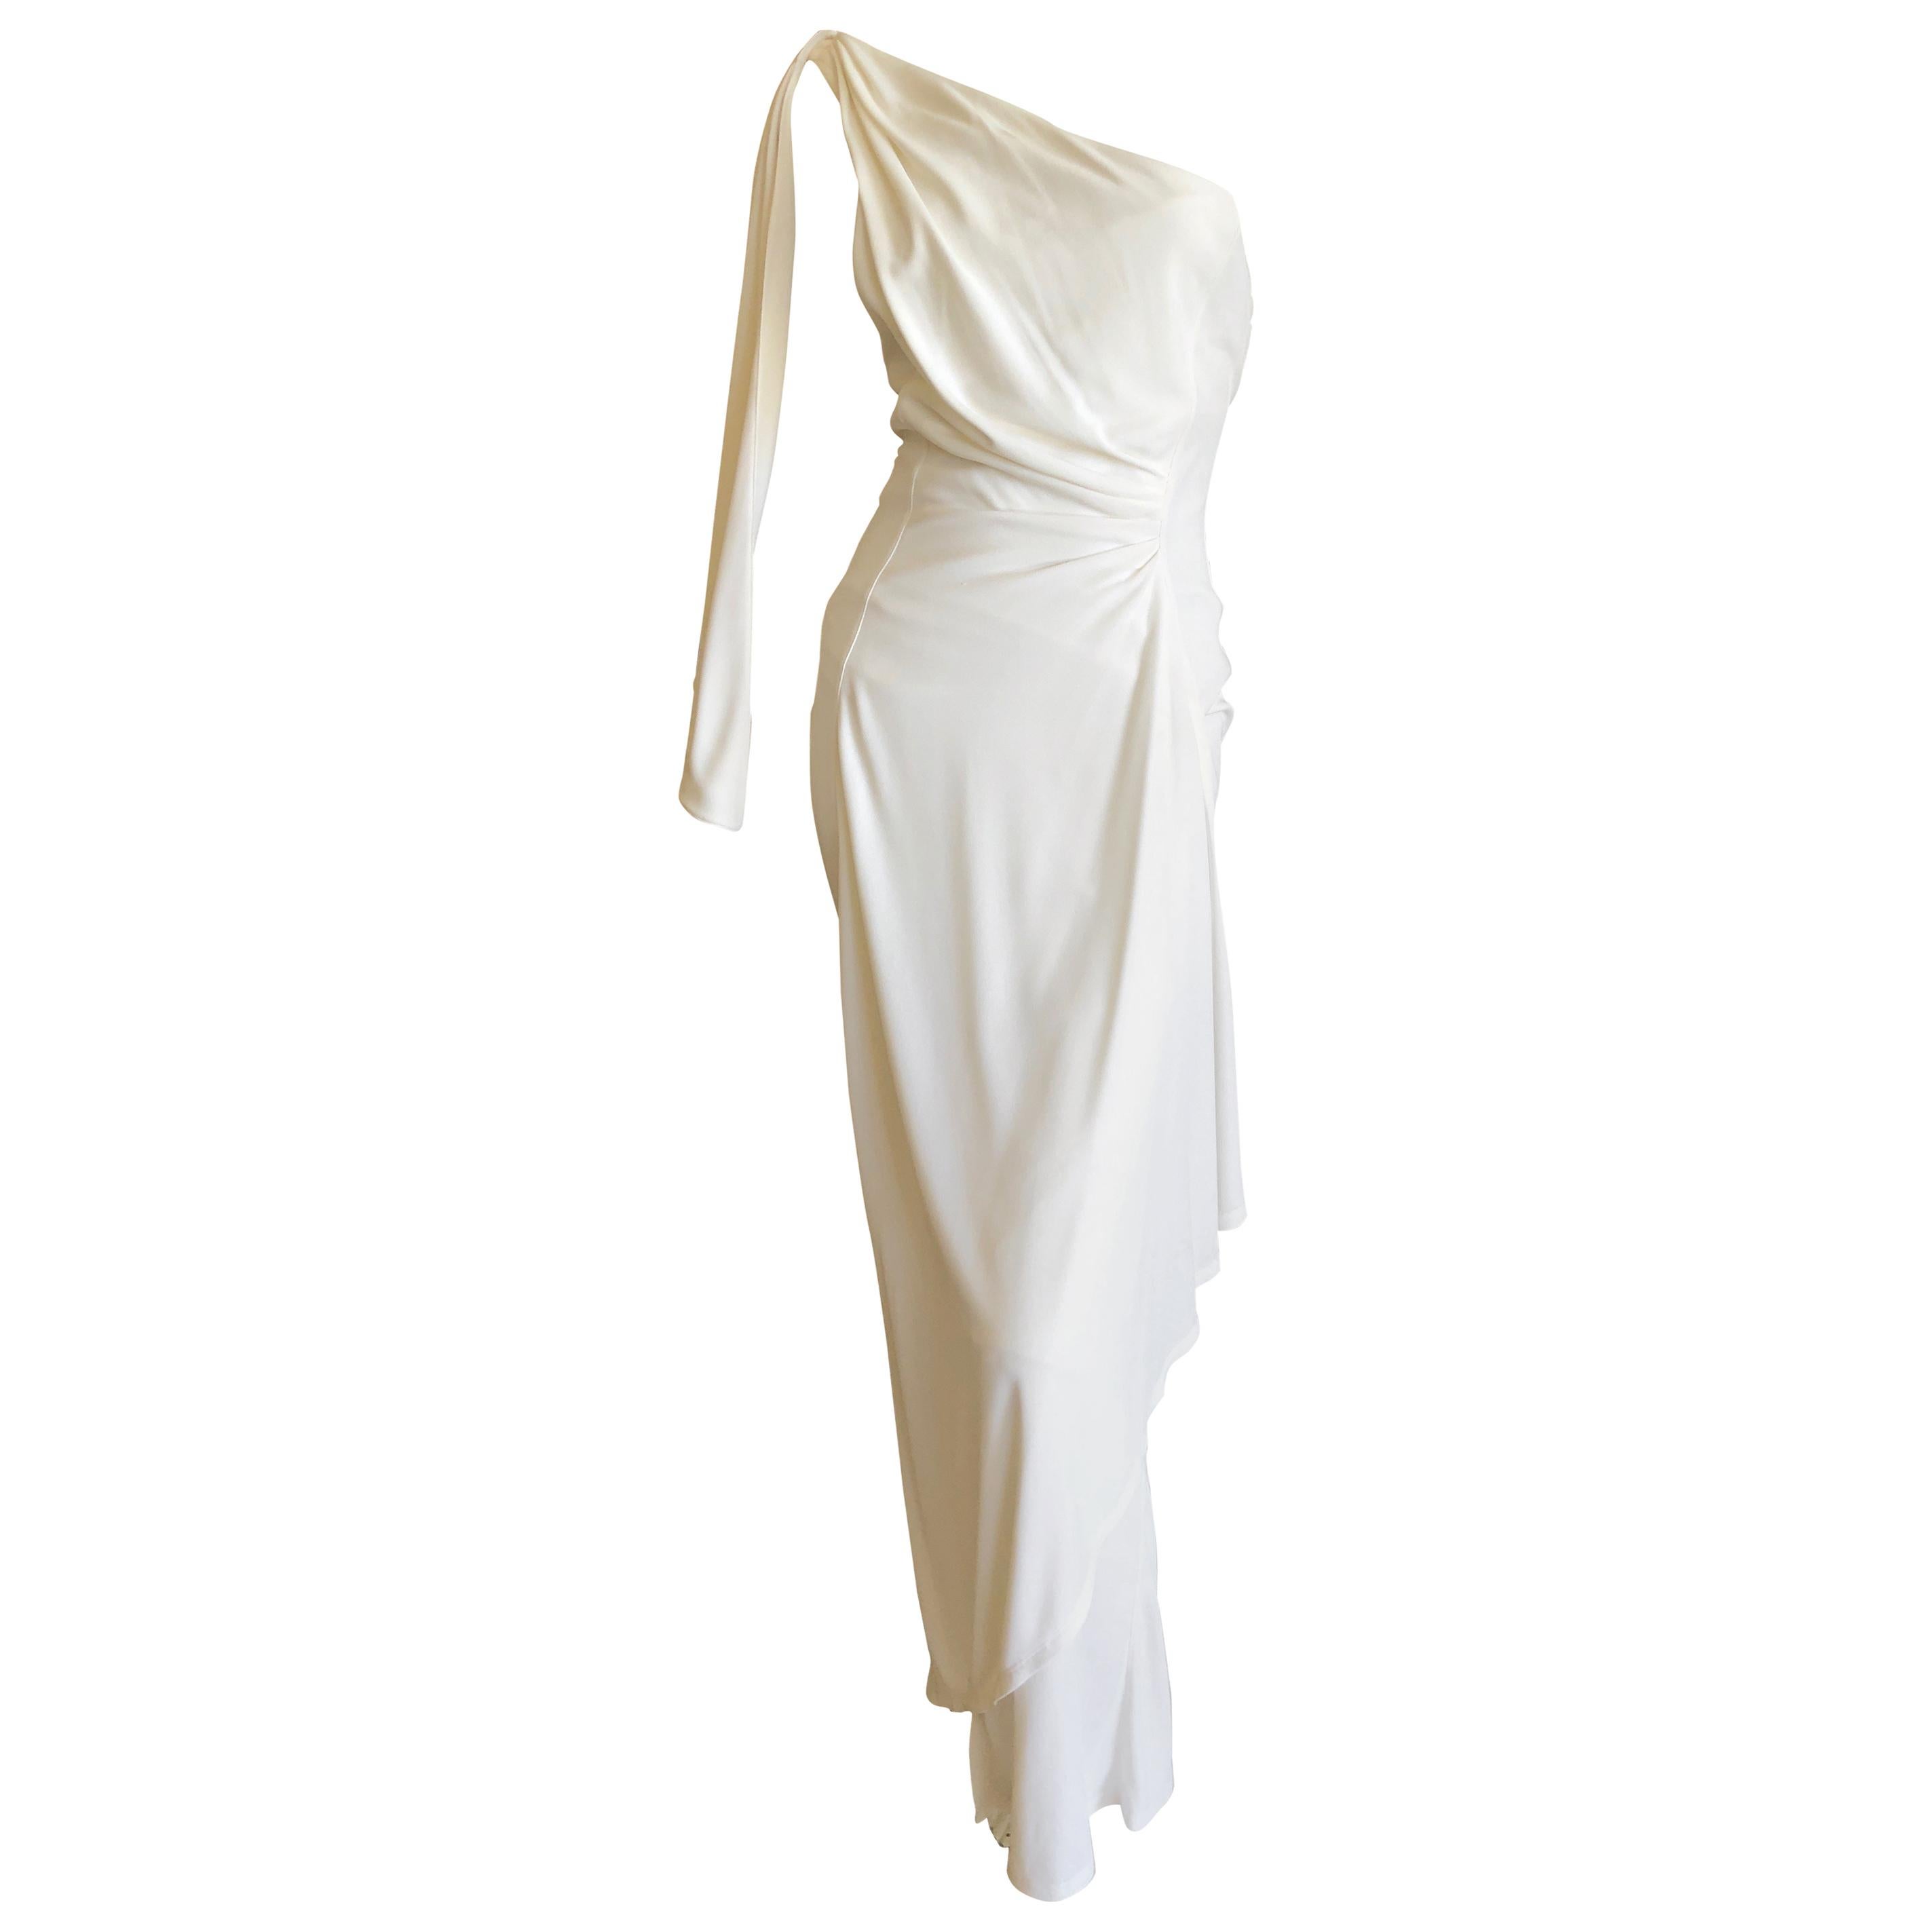 Thierry Mugler Paris Vintage Eighties Ivory White One Shoulder Goddess Dress For Sale